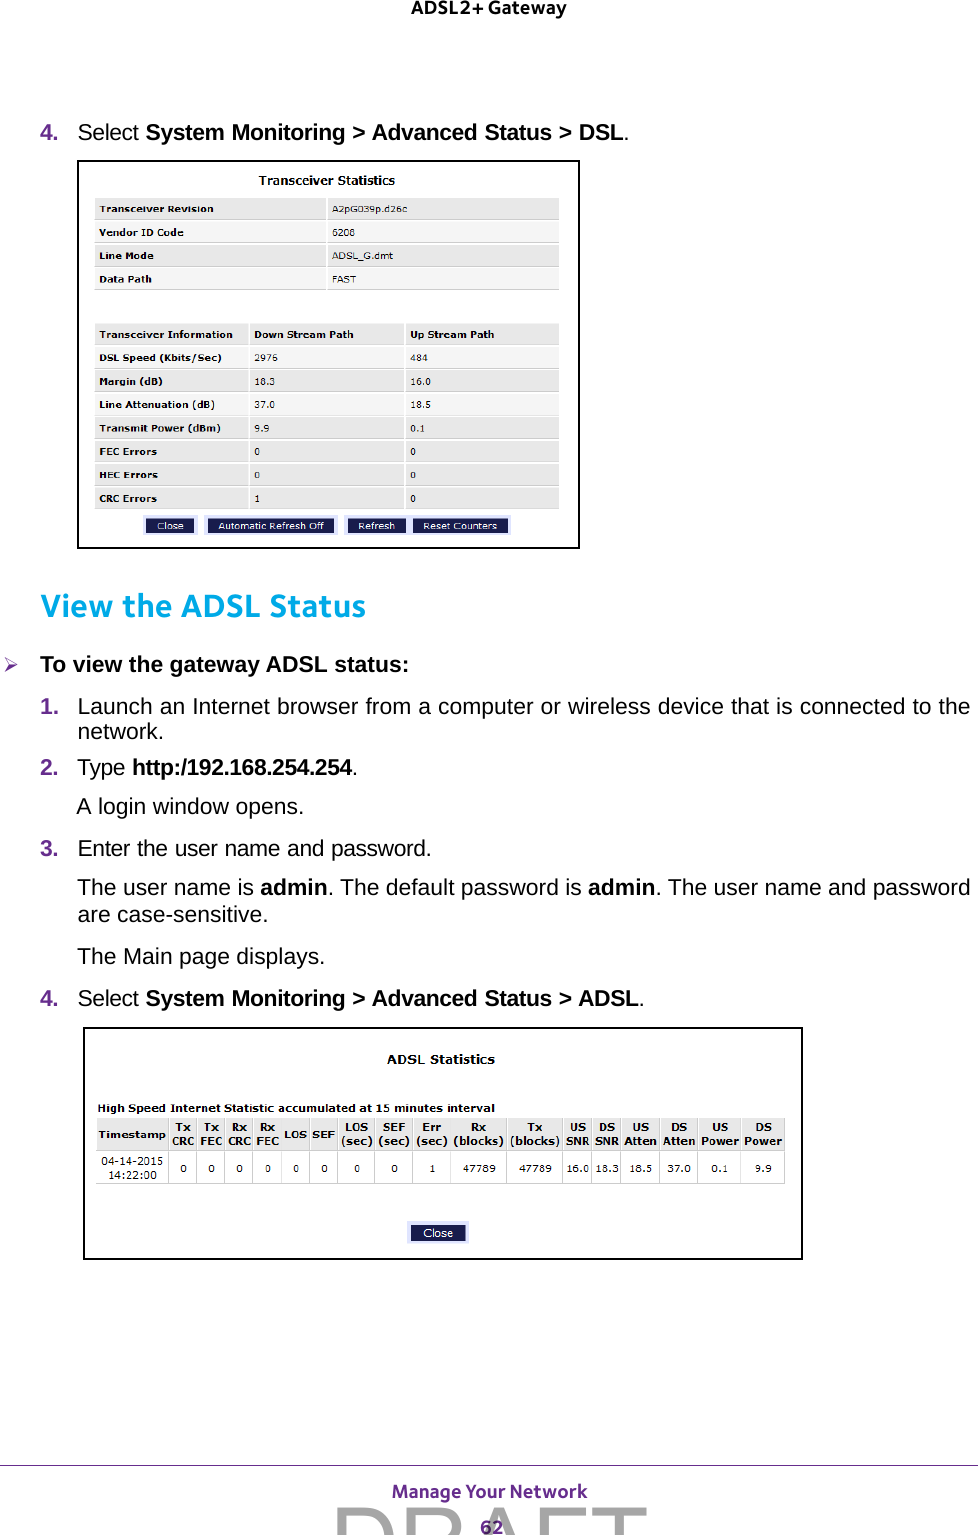 Manage Your Network 62ADSL2+ Gateway 4.  Select System Monitoring &gt; Advanced Status &gt; DSL. View the ADSL StatusTo view the gateway ADSL status:1.  Launch an Internet browser from a computer or wireless device that is connected to the network.2.  Type http:/192.168.254.254.A login window opens.3.  Enter the user name and password.The user name is admin. The default password is admin. The user name and password are case-sensitive.The Main page displays.4.  Select System Monitoring &gt; Advanced Status &gt; ADSL. DRAFT